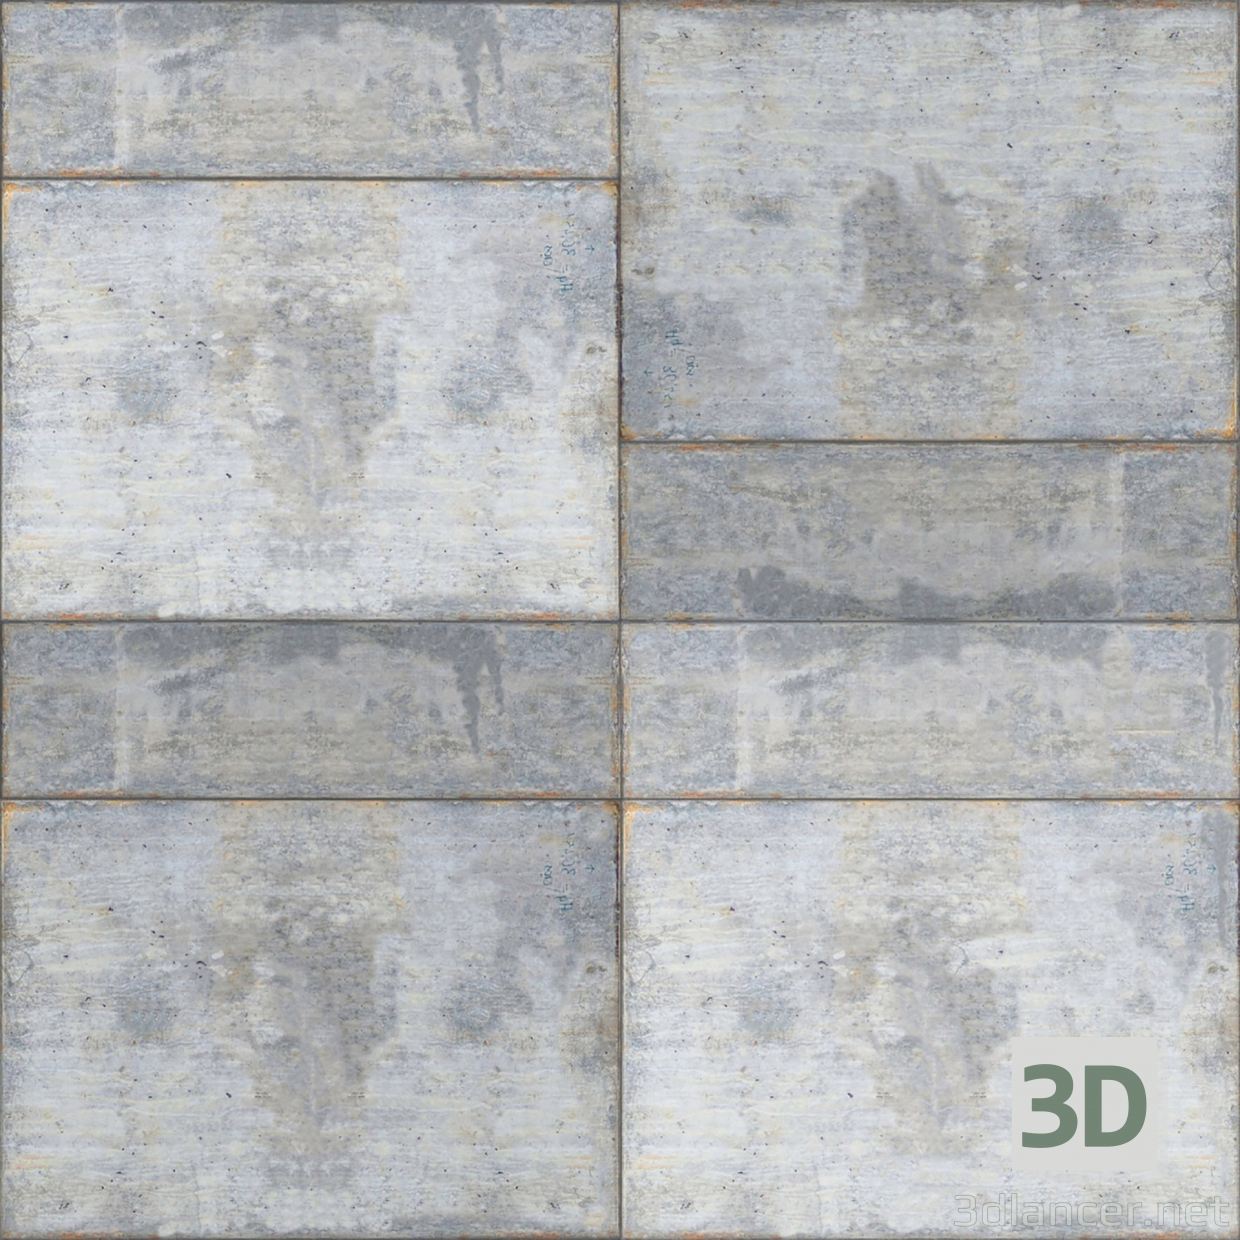 Texture wall free download - image